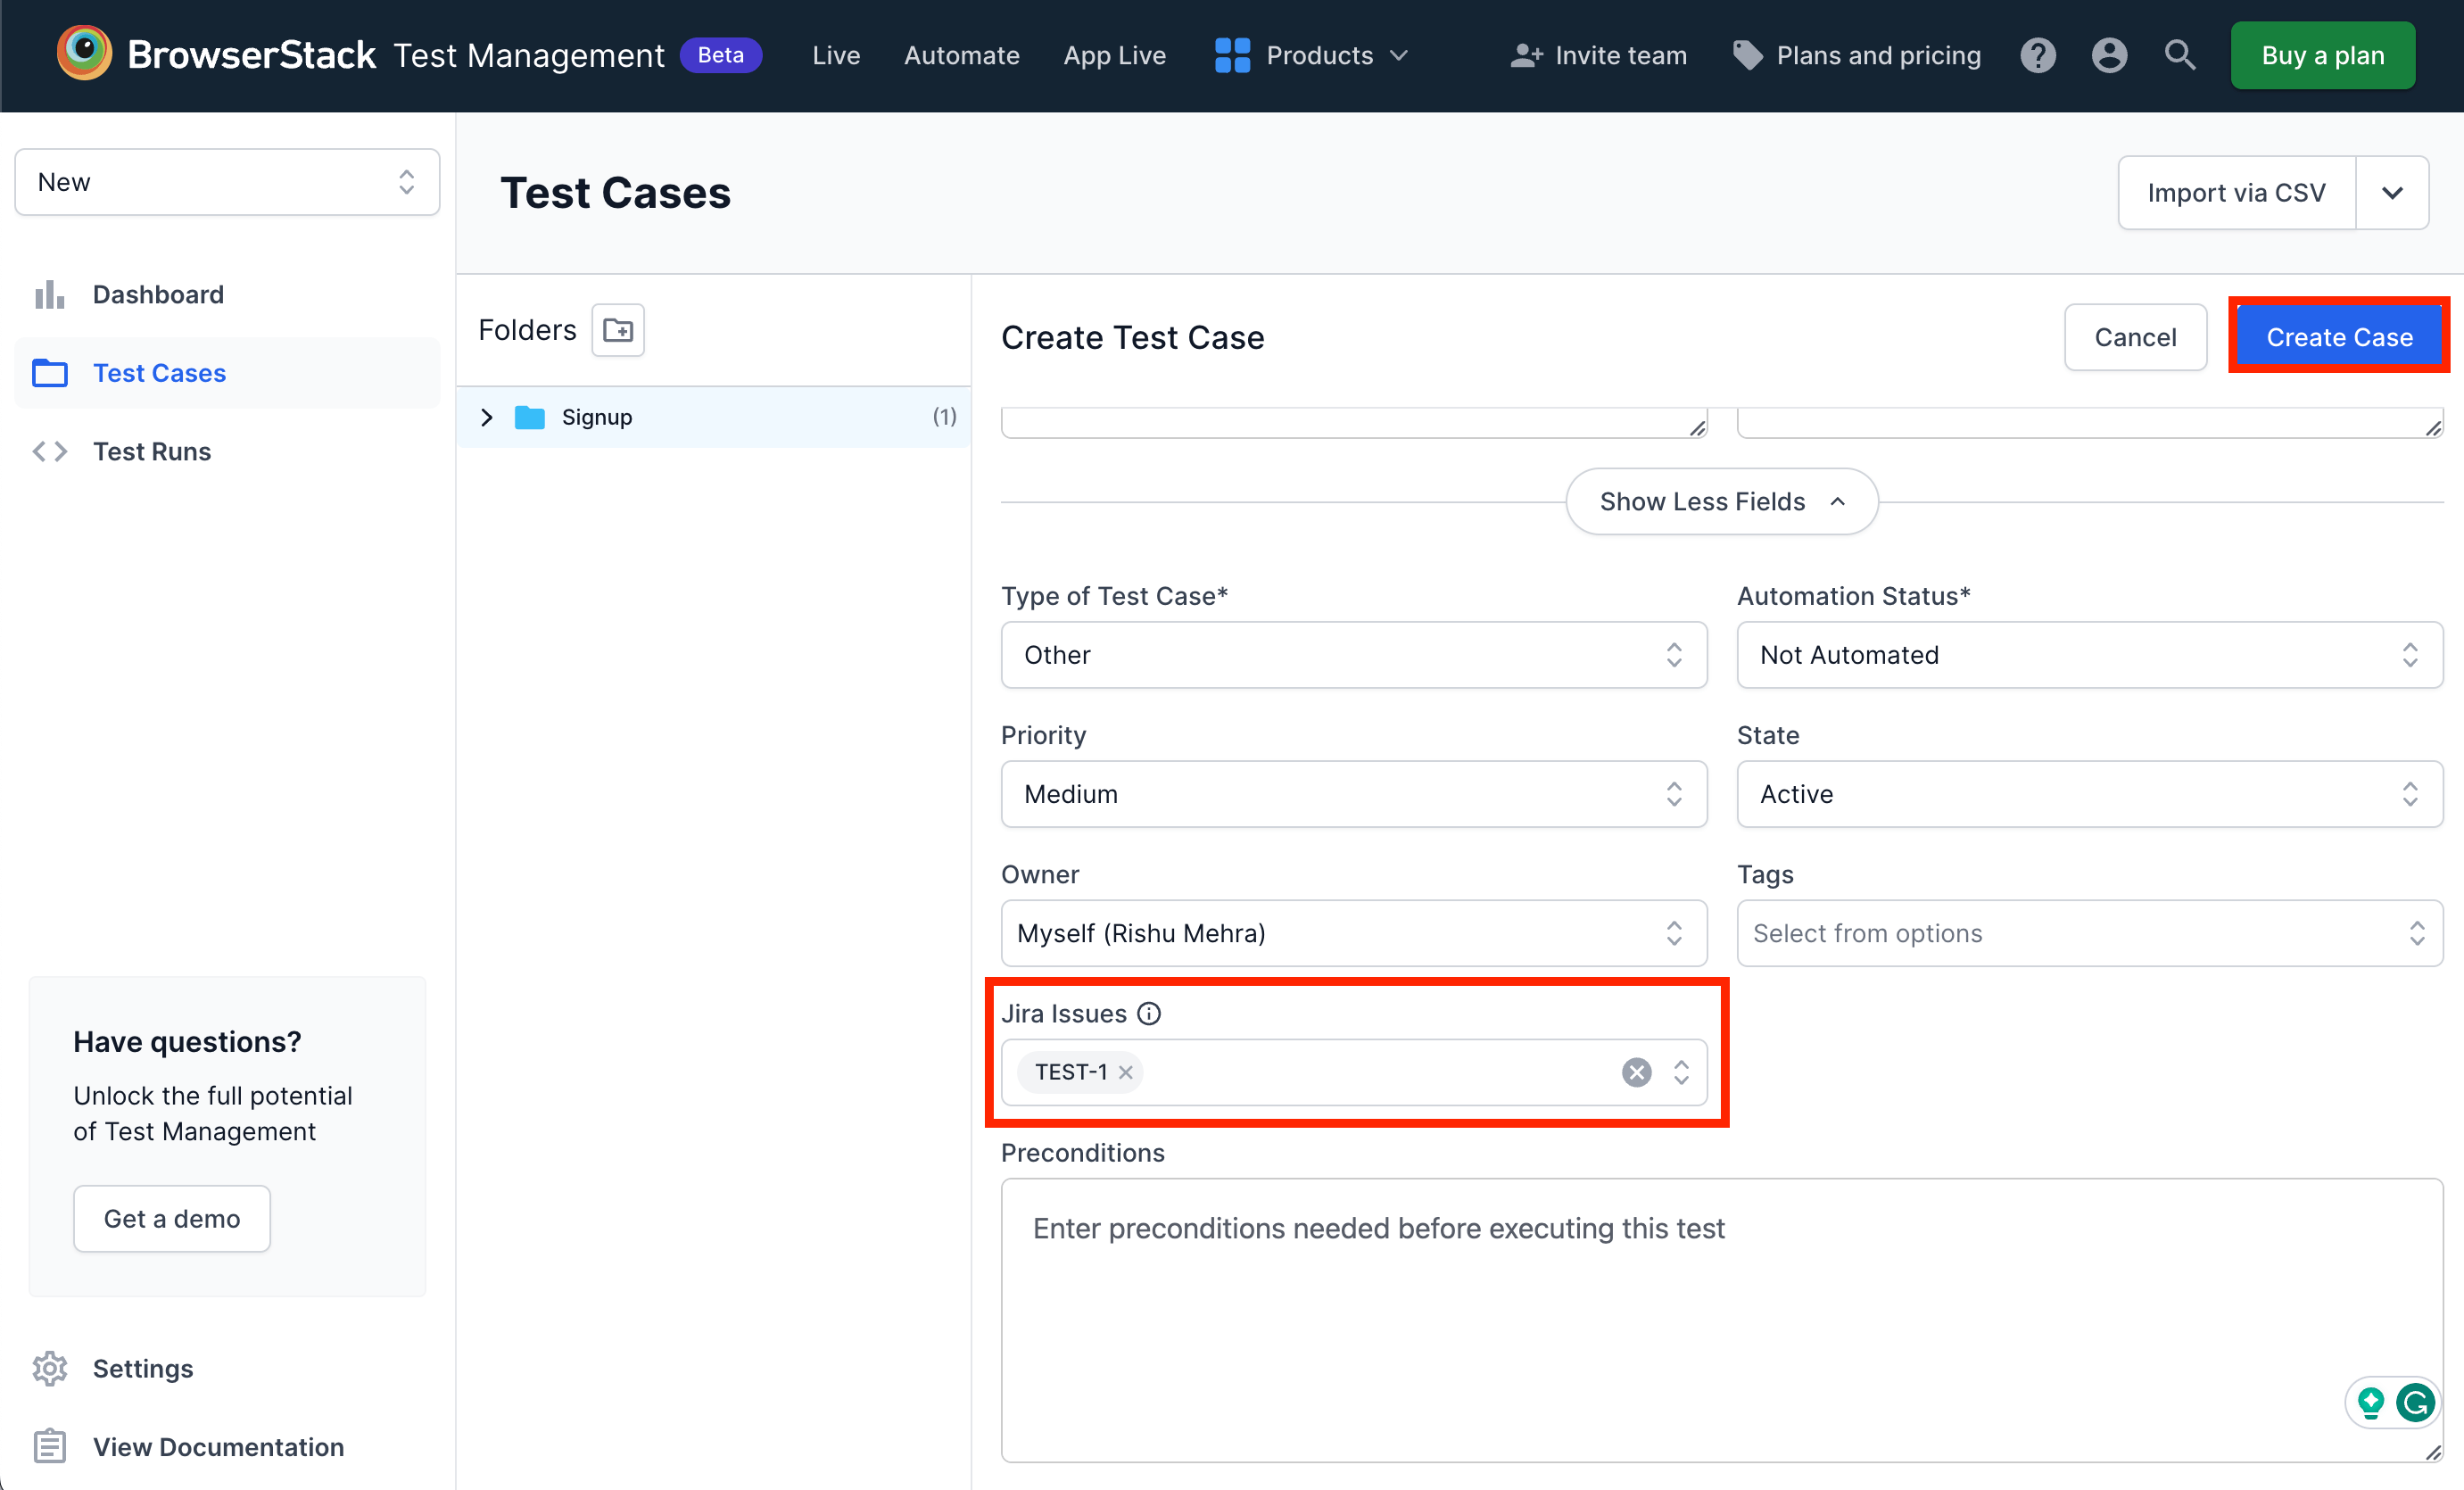 Entering Jira Issue while creating a test case